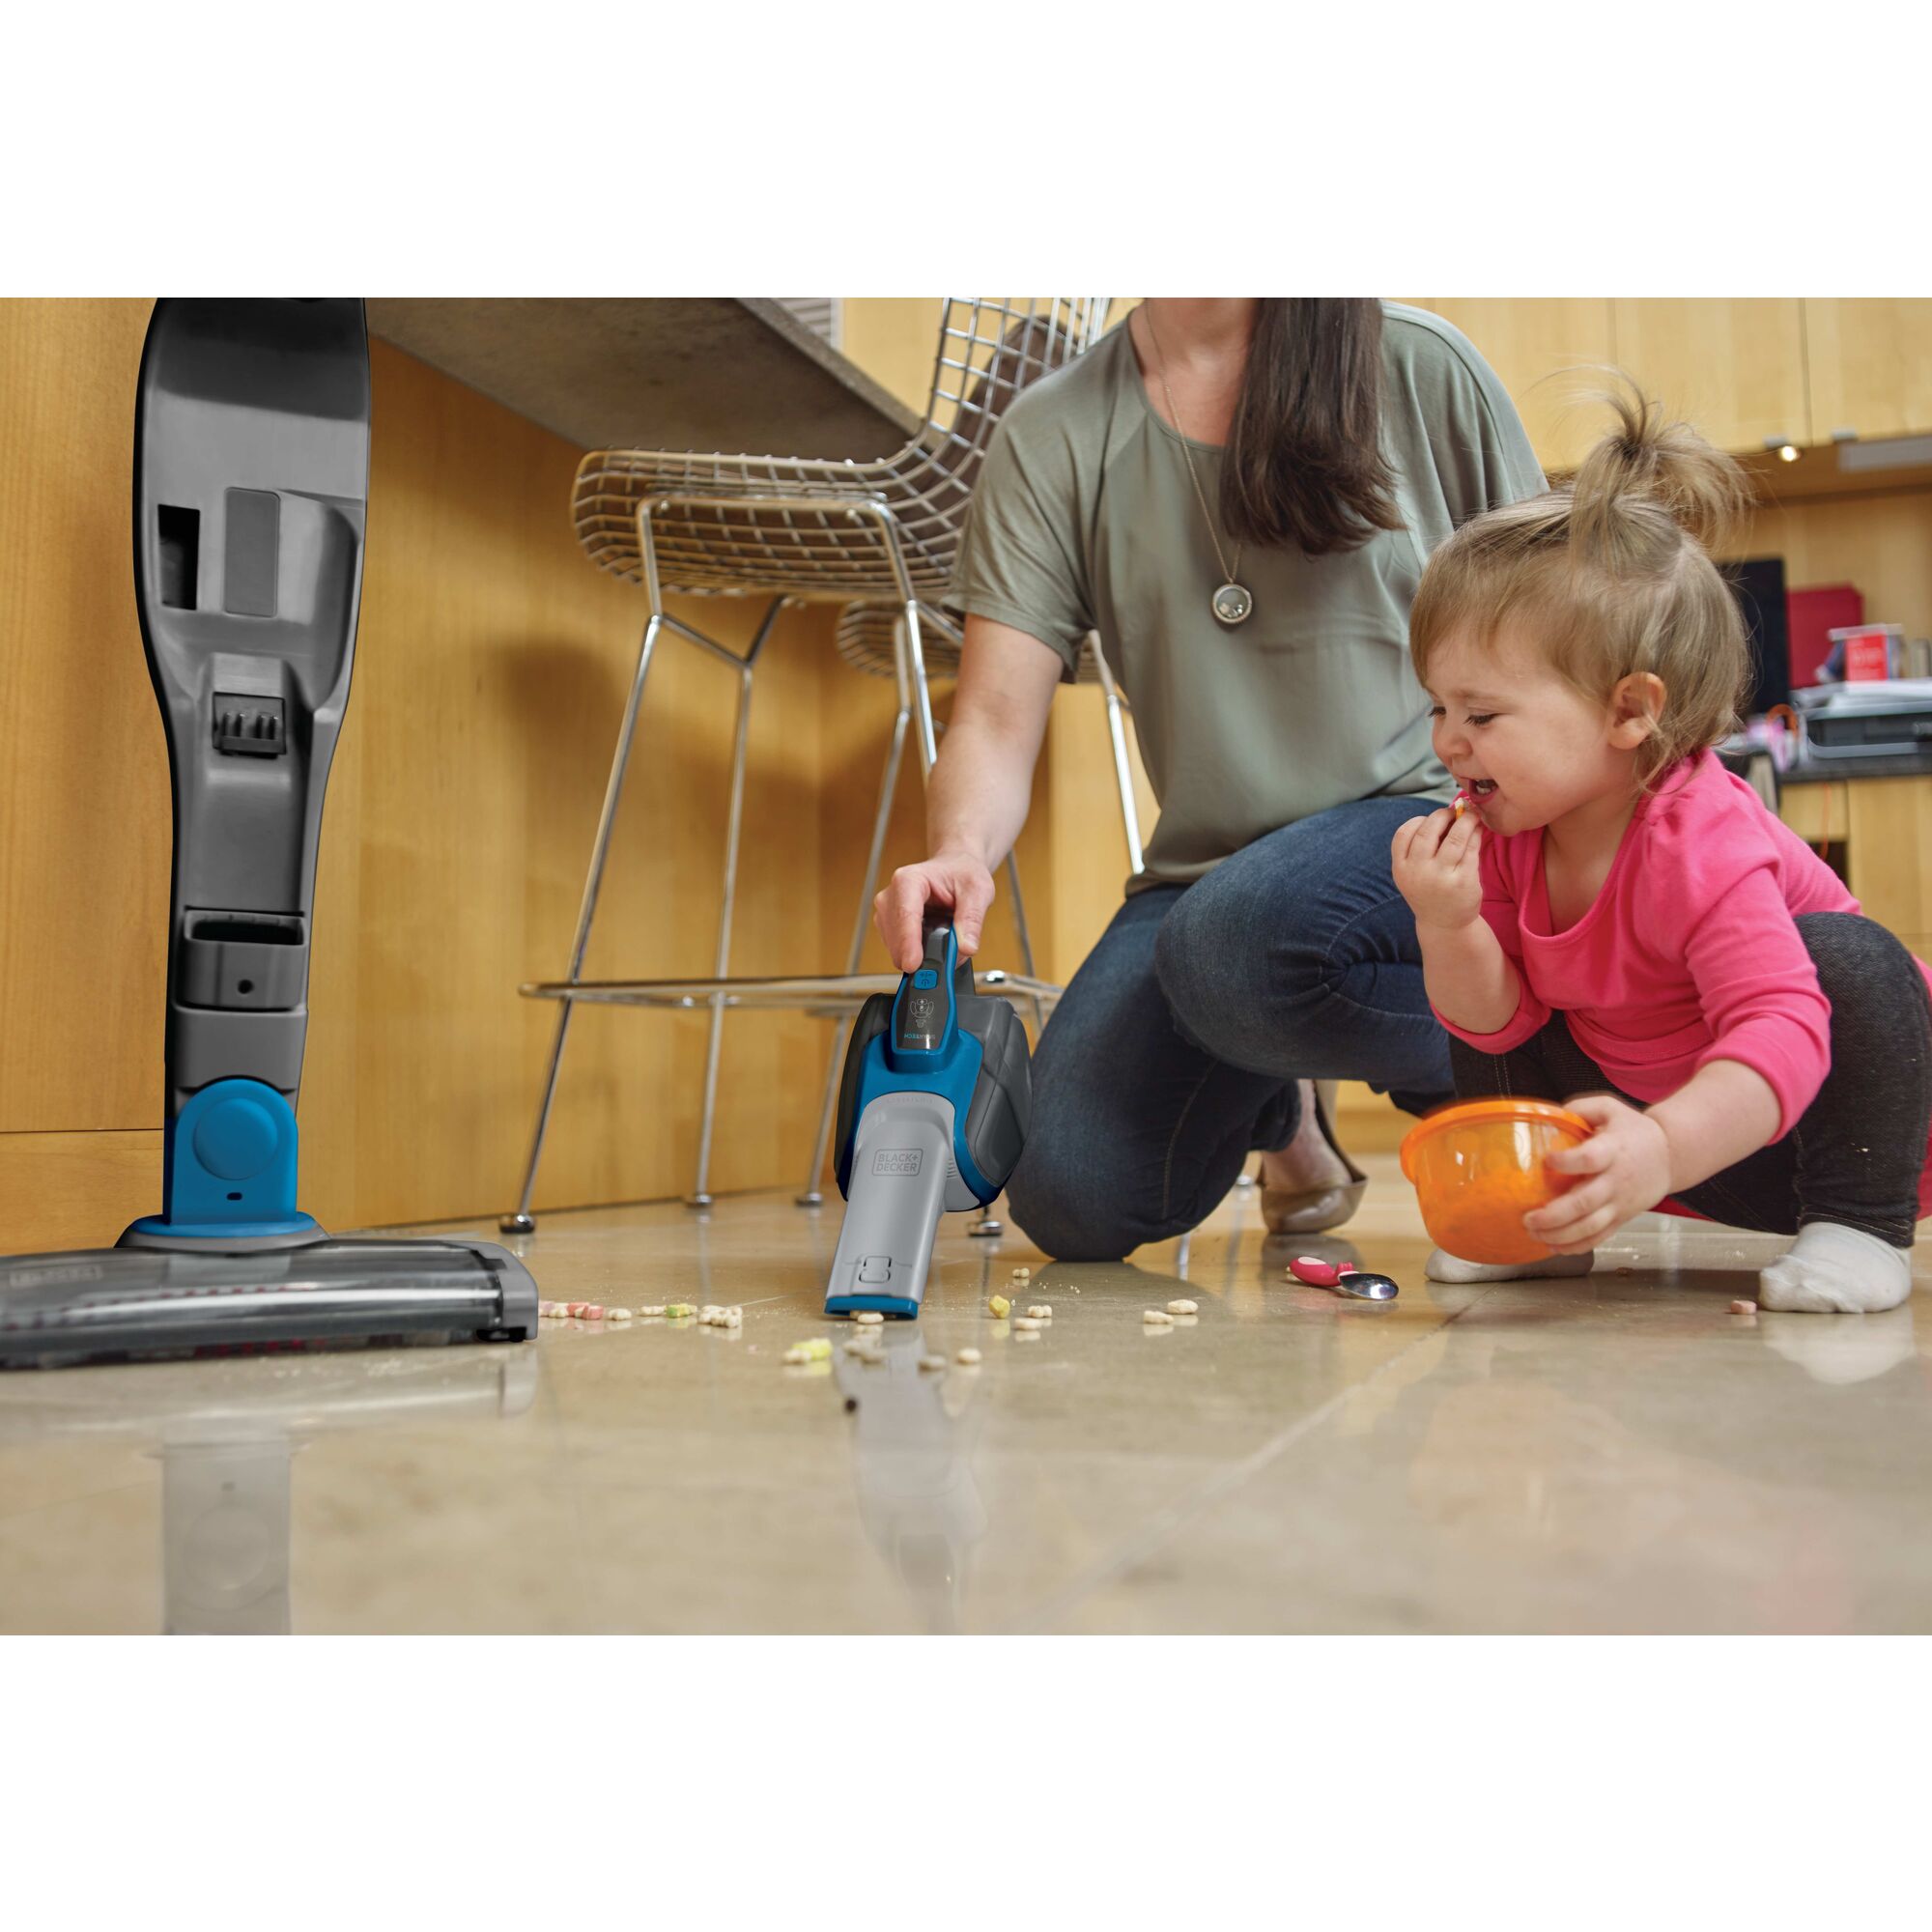 Cordless Lithium 2 in 1 Stick Vacuum being used for cleaning baby food mess by hand held vacuum.